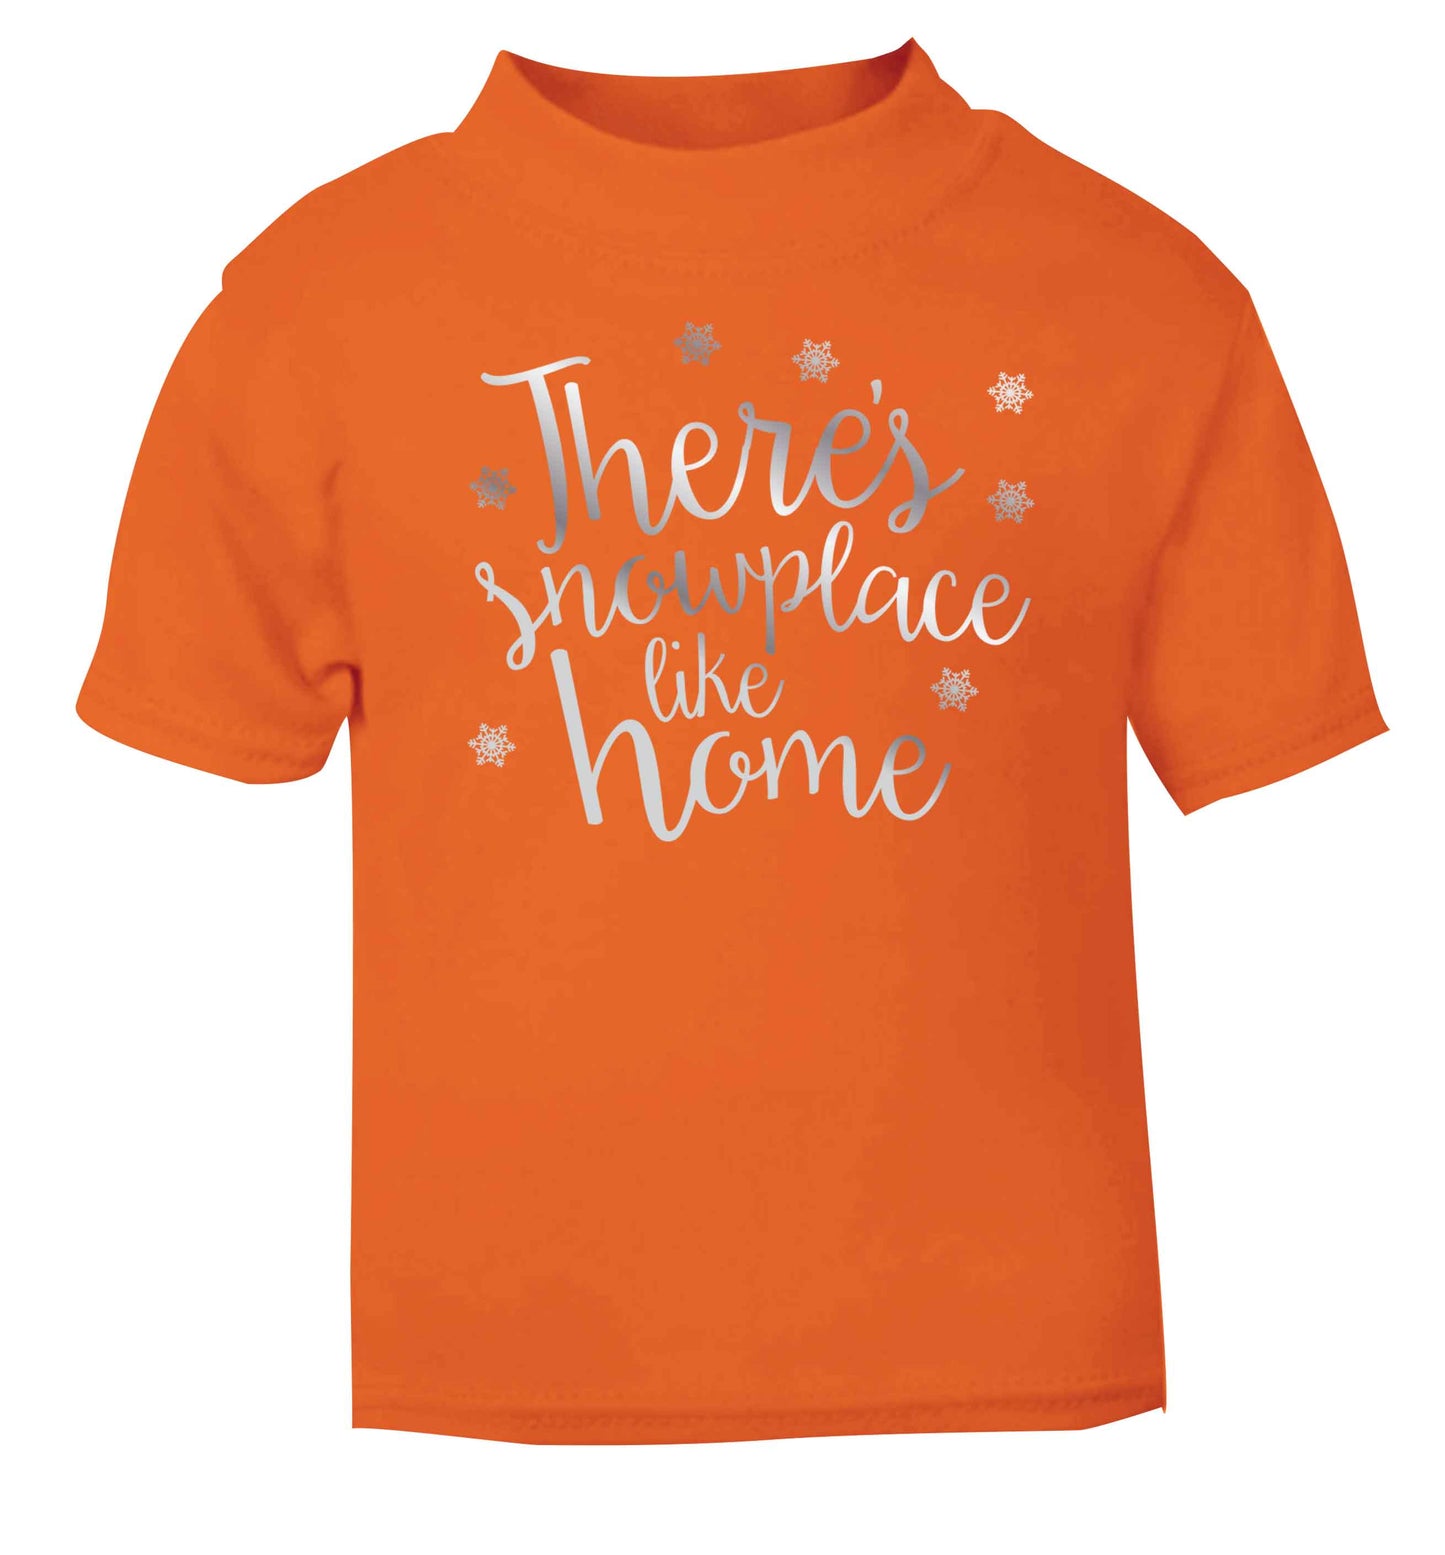 There's snowplace like home - metallic silver orange baby toddler Tshirt 2 Years